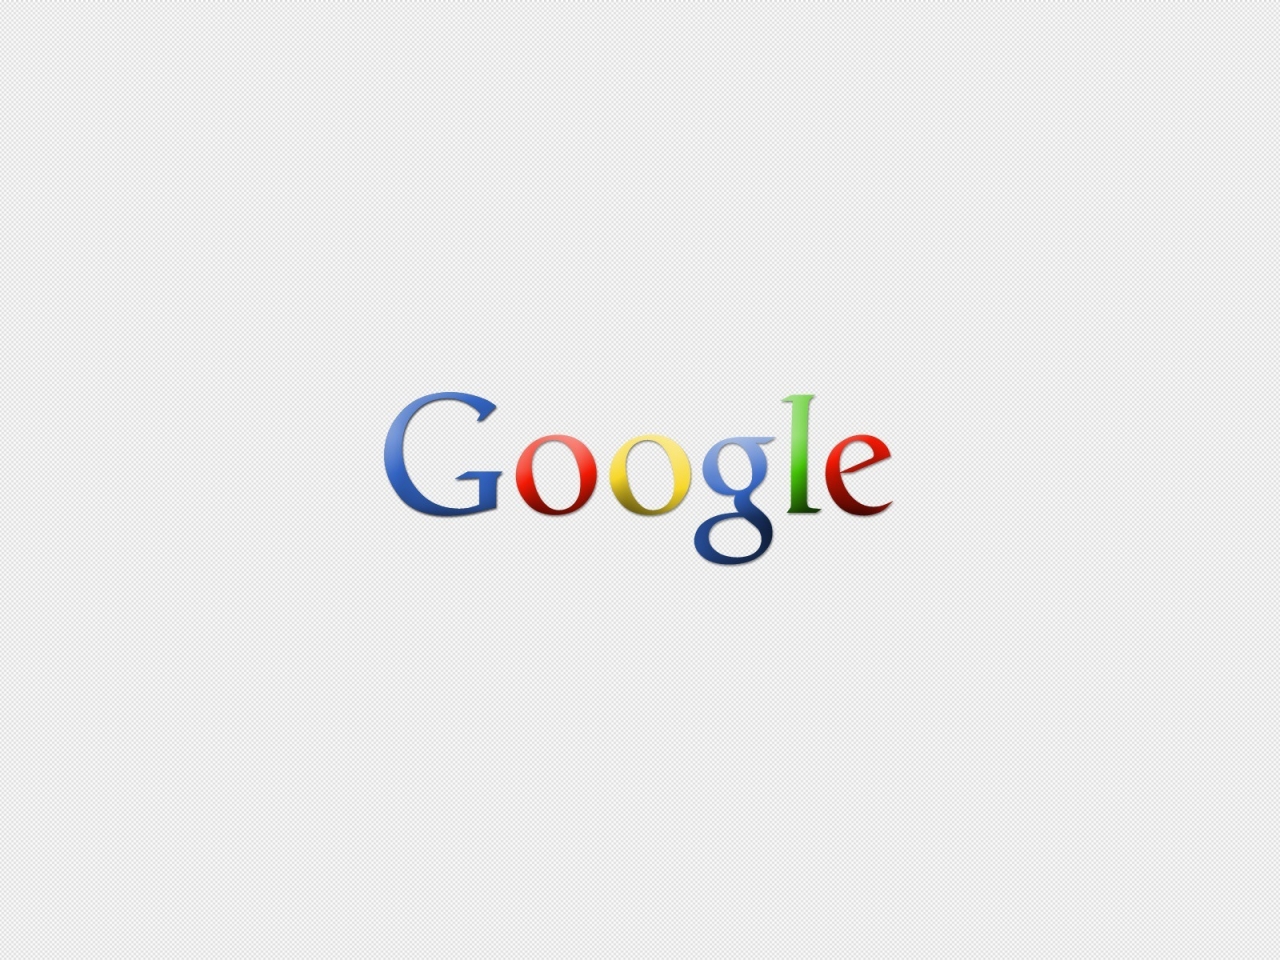 Google for 1280 x 960 resolution